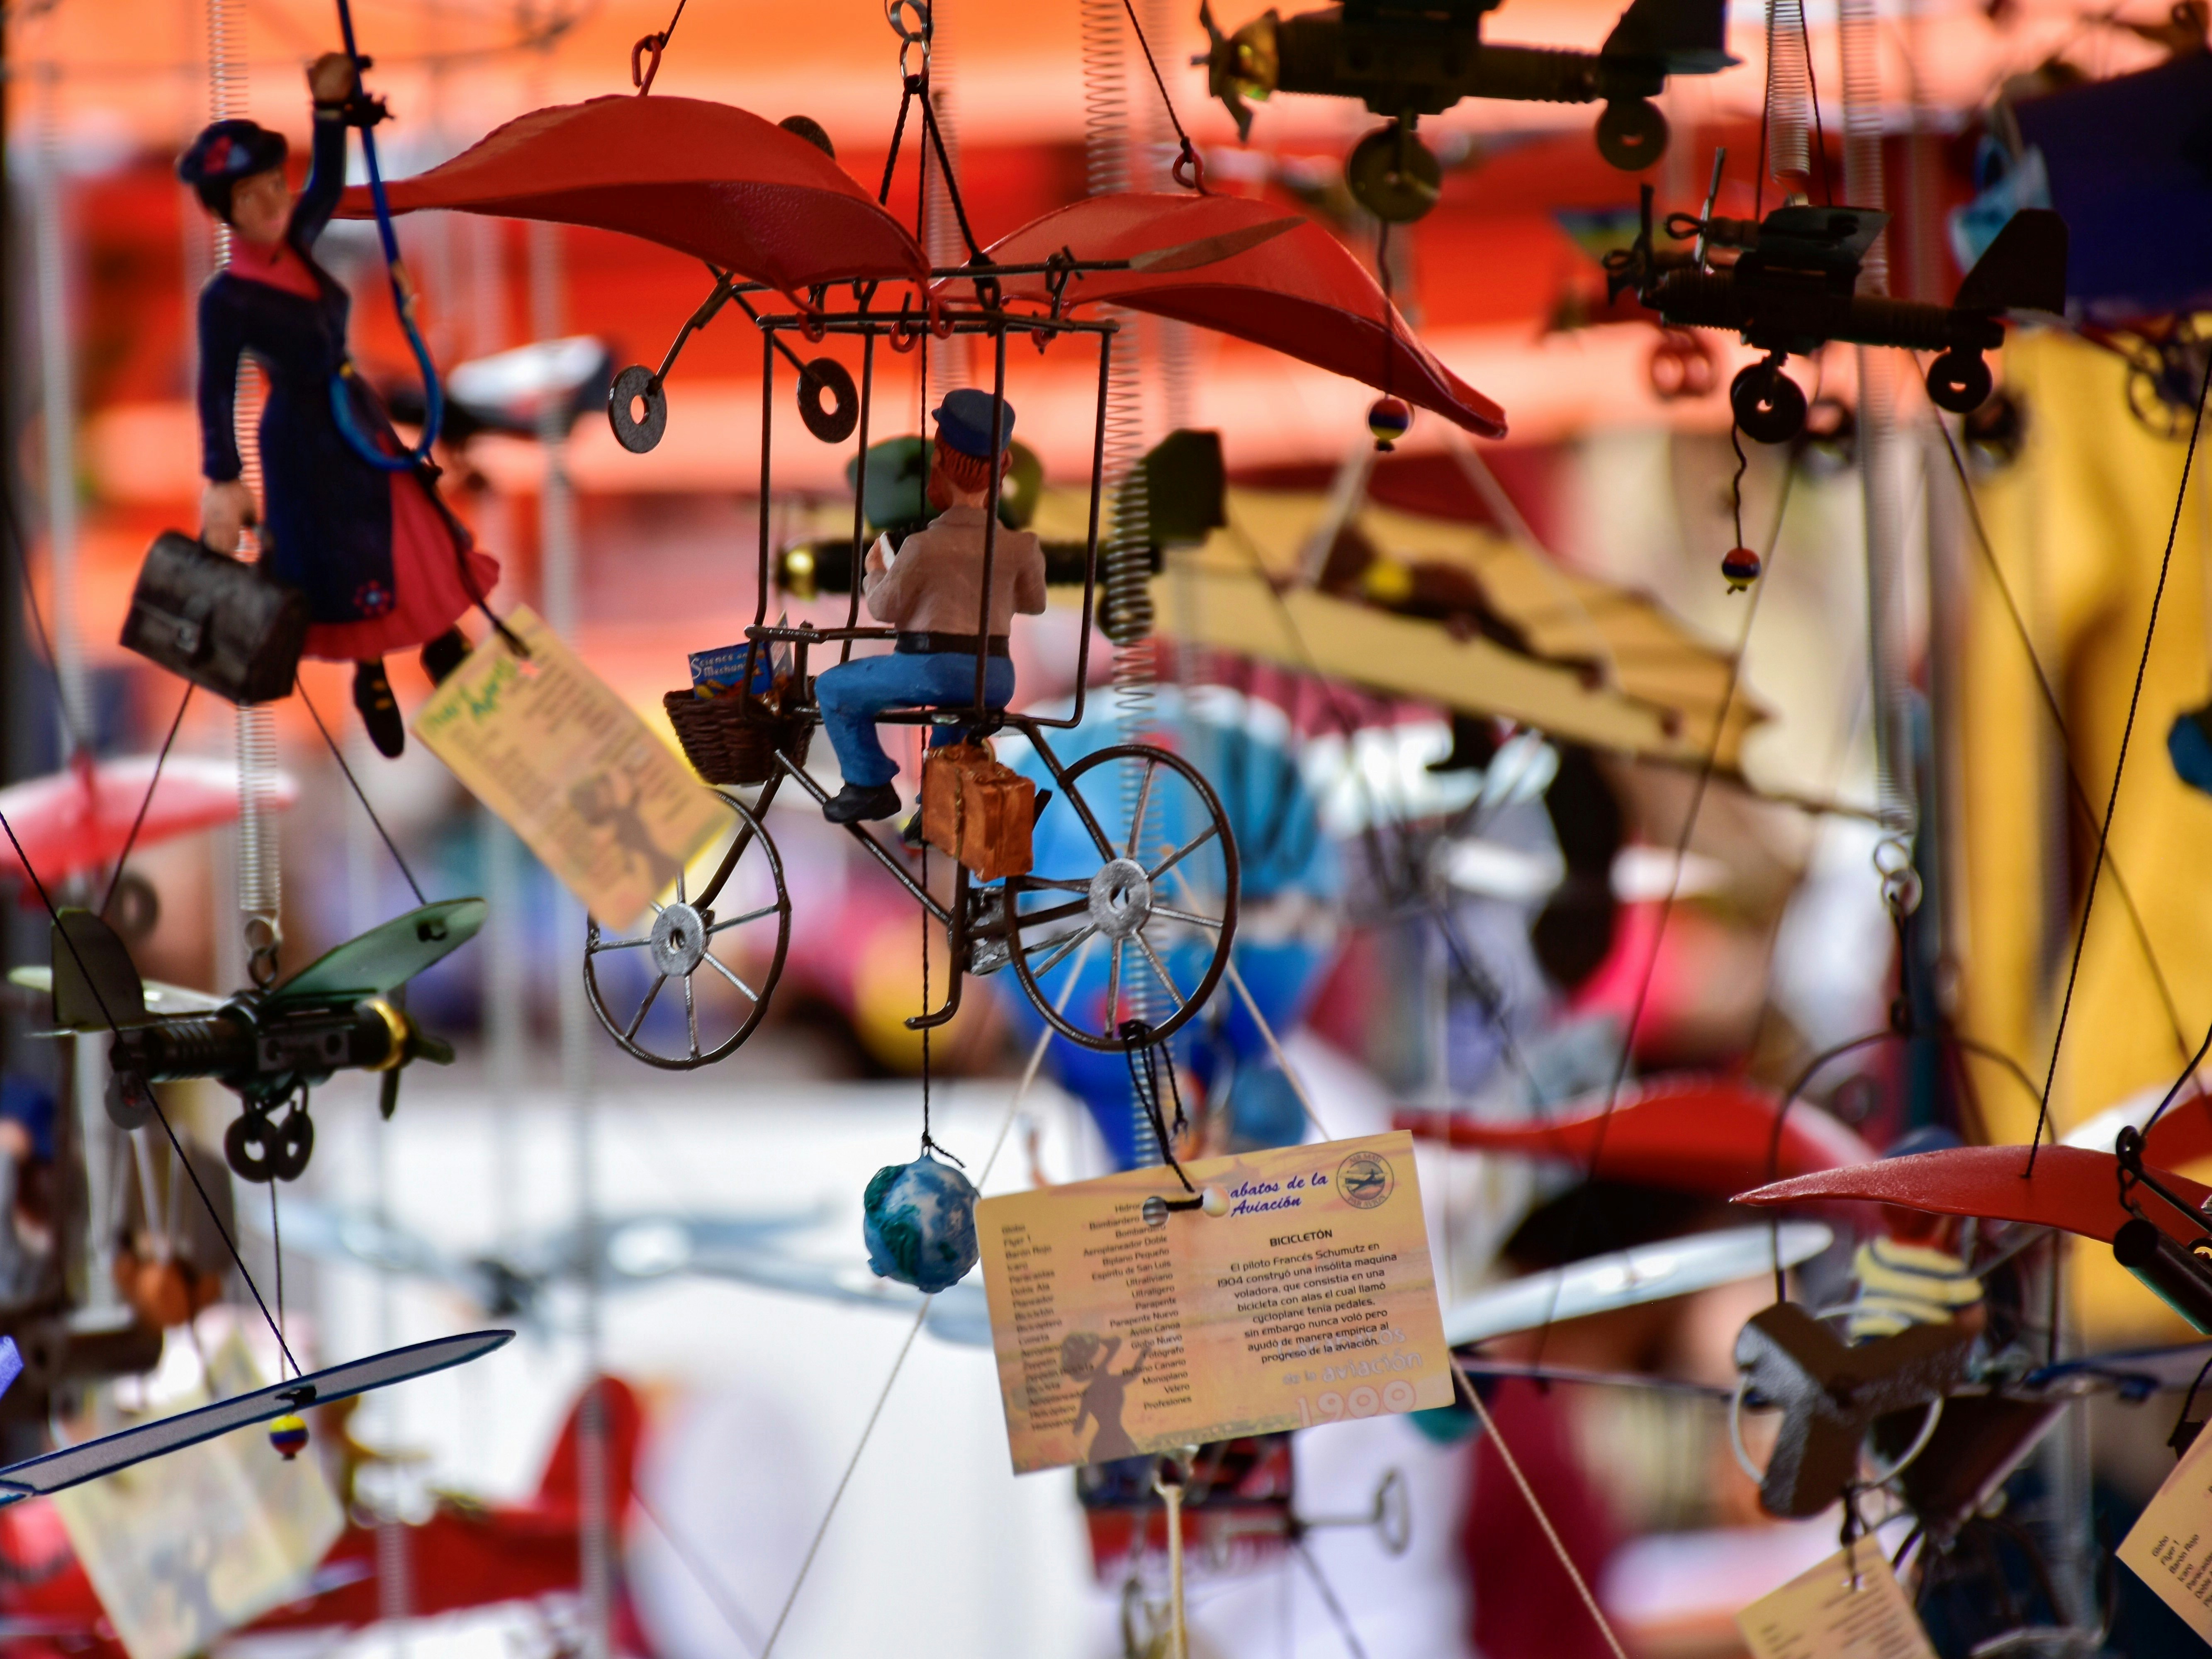 A display of hand-made puppets and other toys including a Mary Popppins figure, a man on a bicycle, airplanes, etc hang at the Usaquen Park Sunday Craft Fair in Bogota Columbia